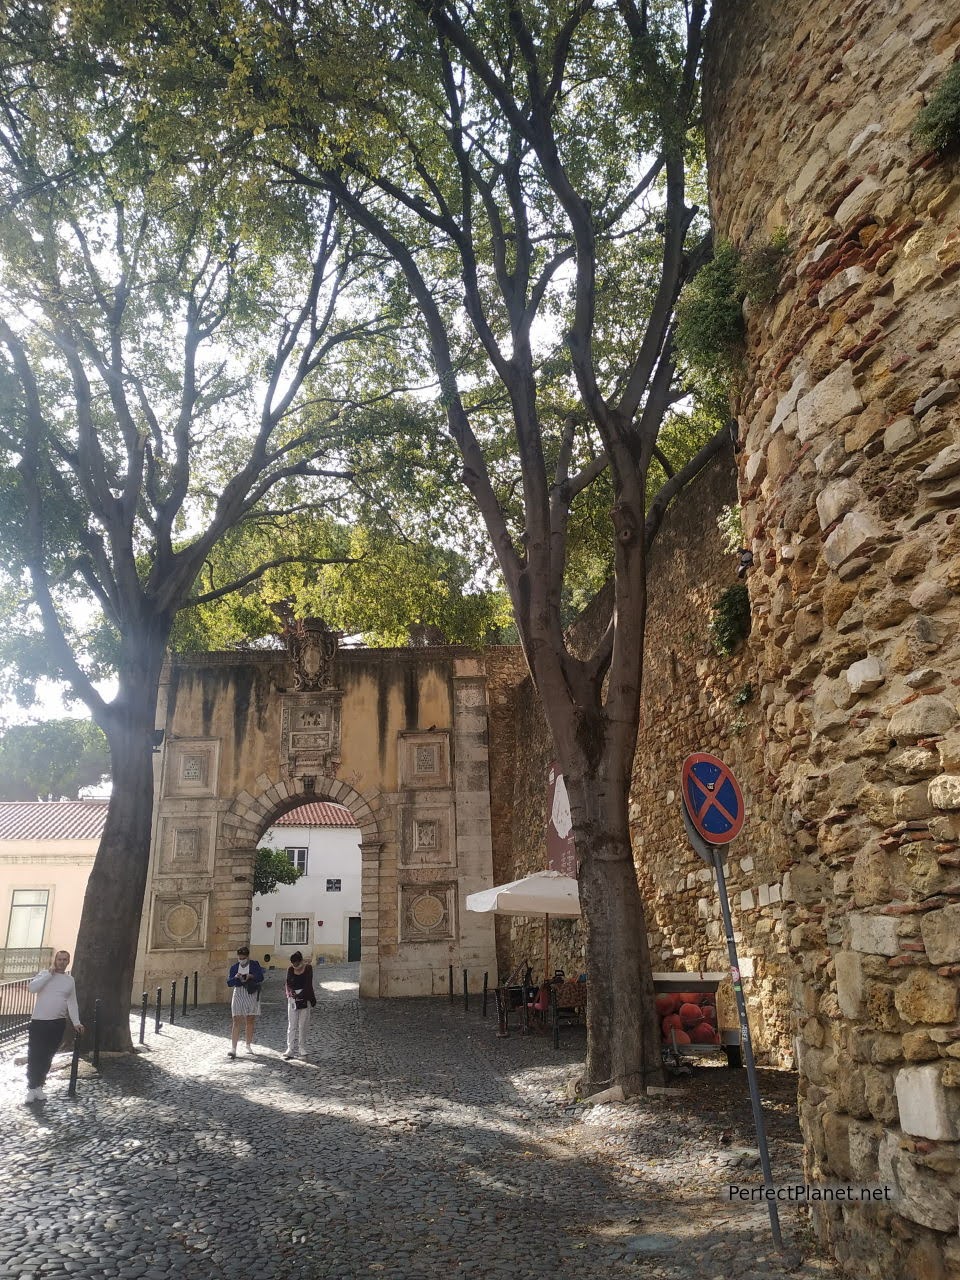 Access to the Castle